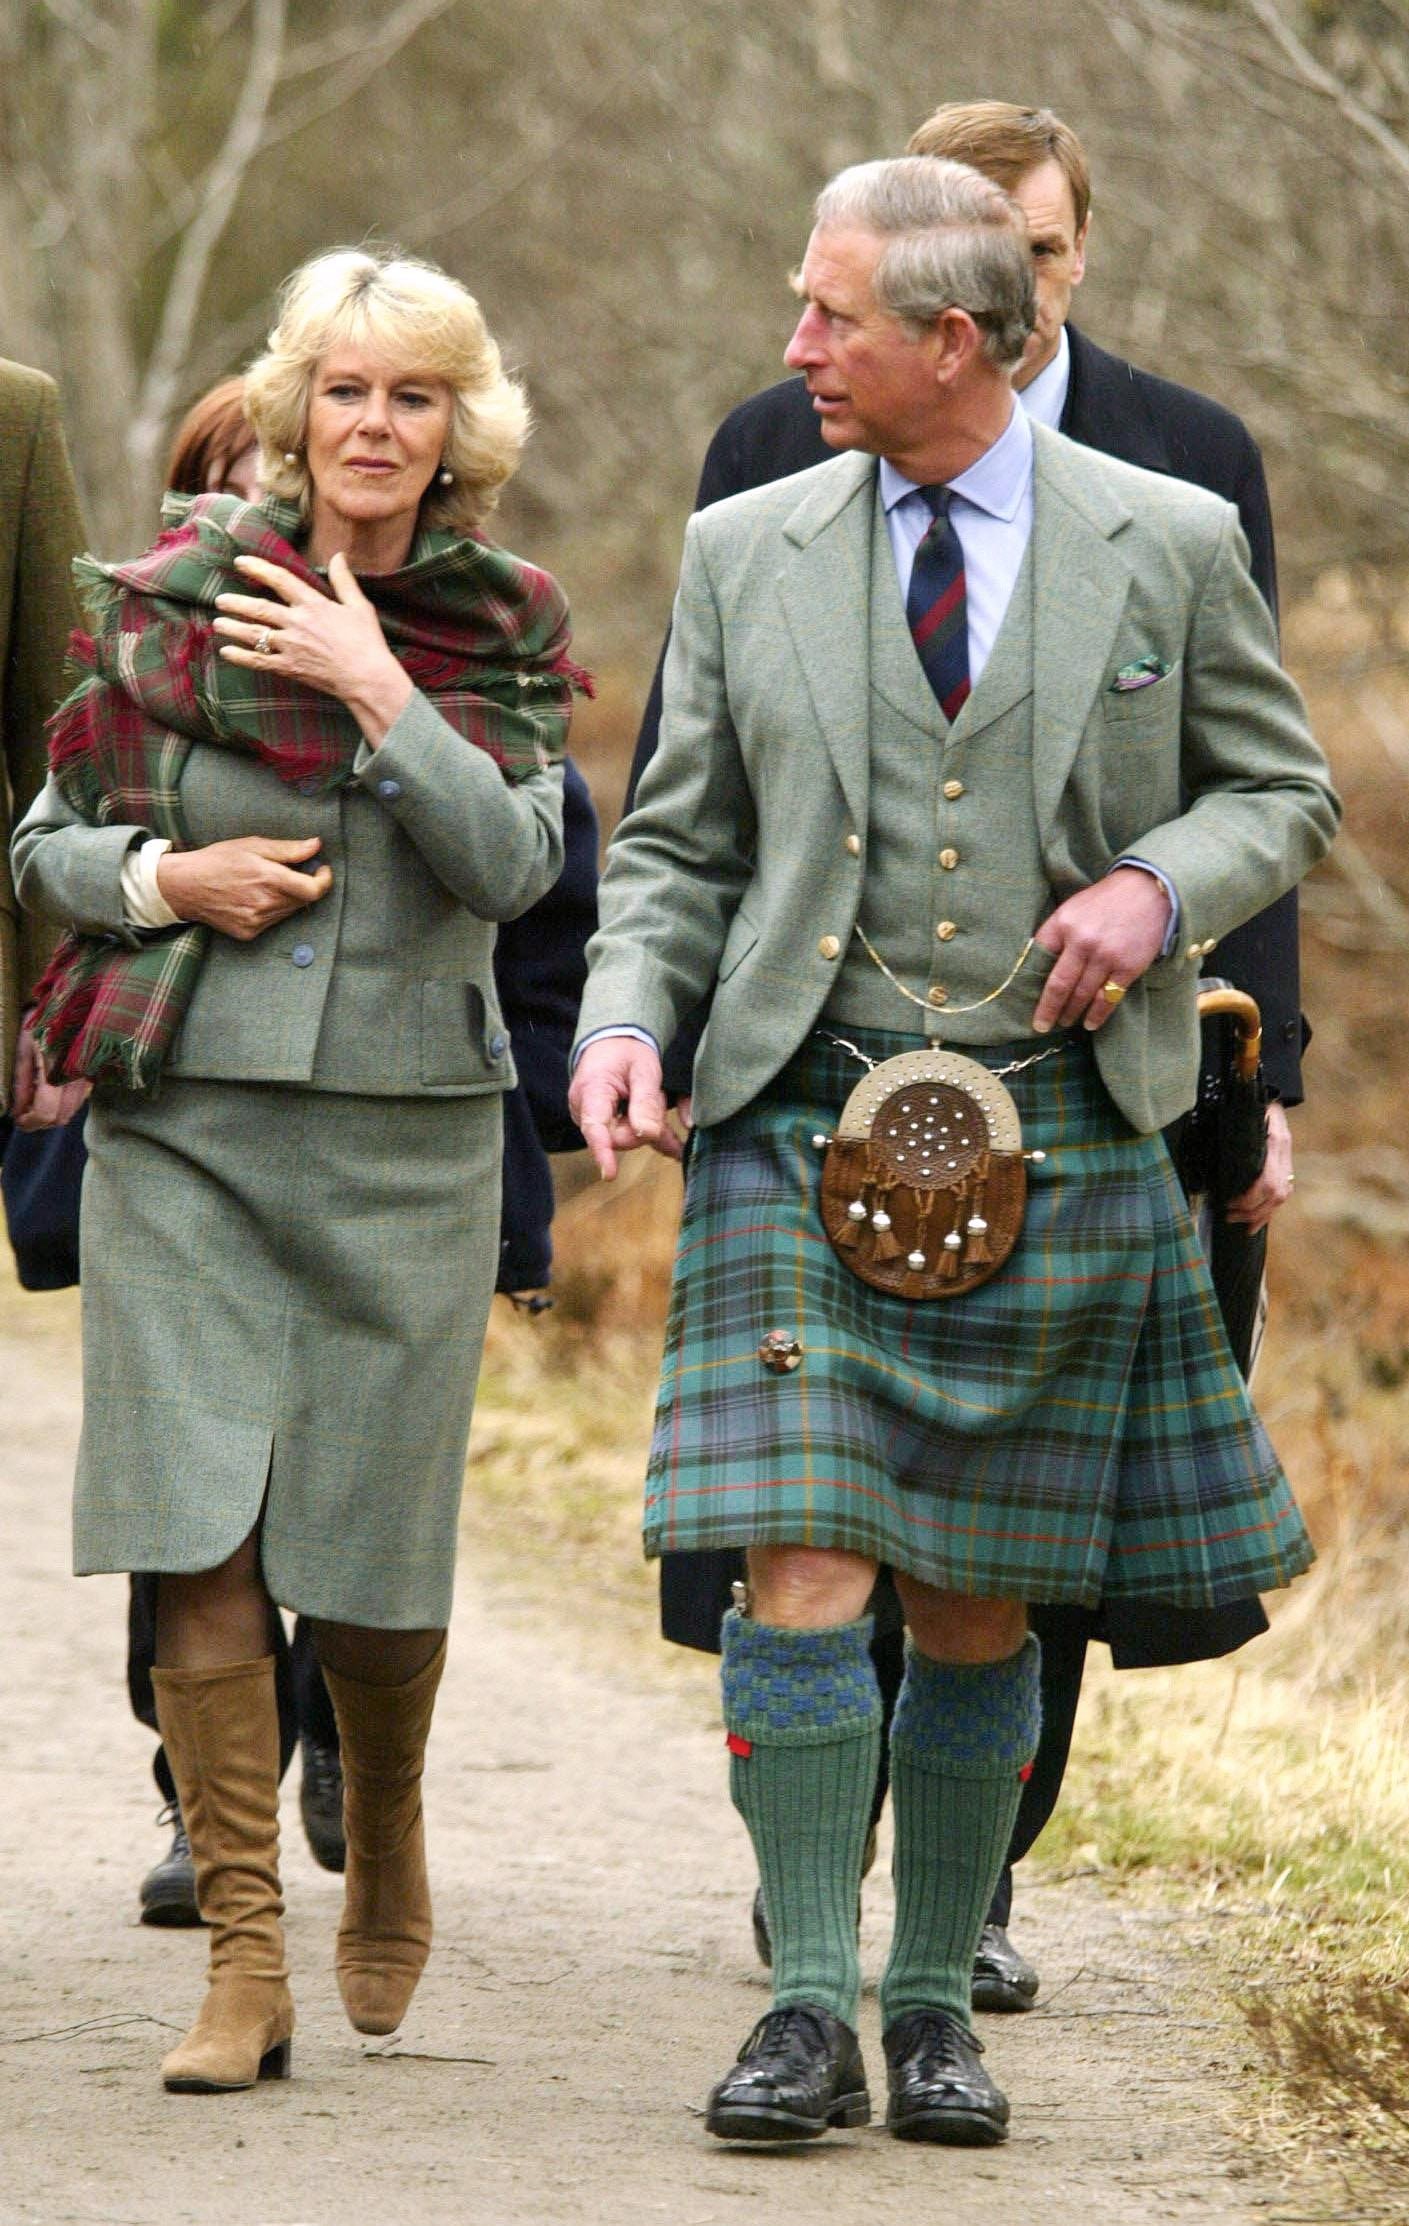 King Charles III, then the Prince of Wales, and Queen Consort Camilla Bowles, then the Duchess of Cornwall, visit Muir of Dinnet National Nature Reserve on Royal Deeside in Scotland, back in 2006.